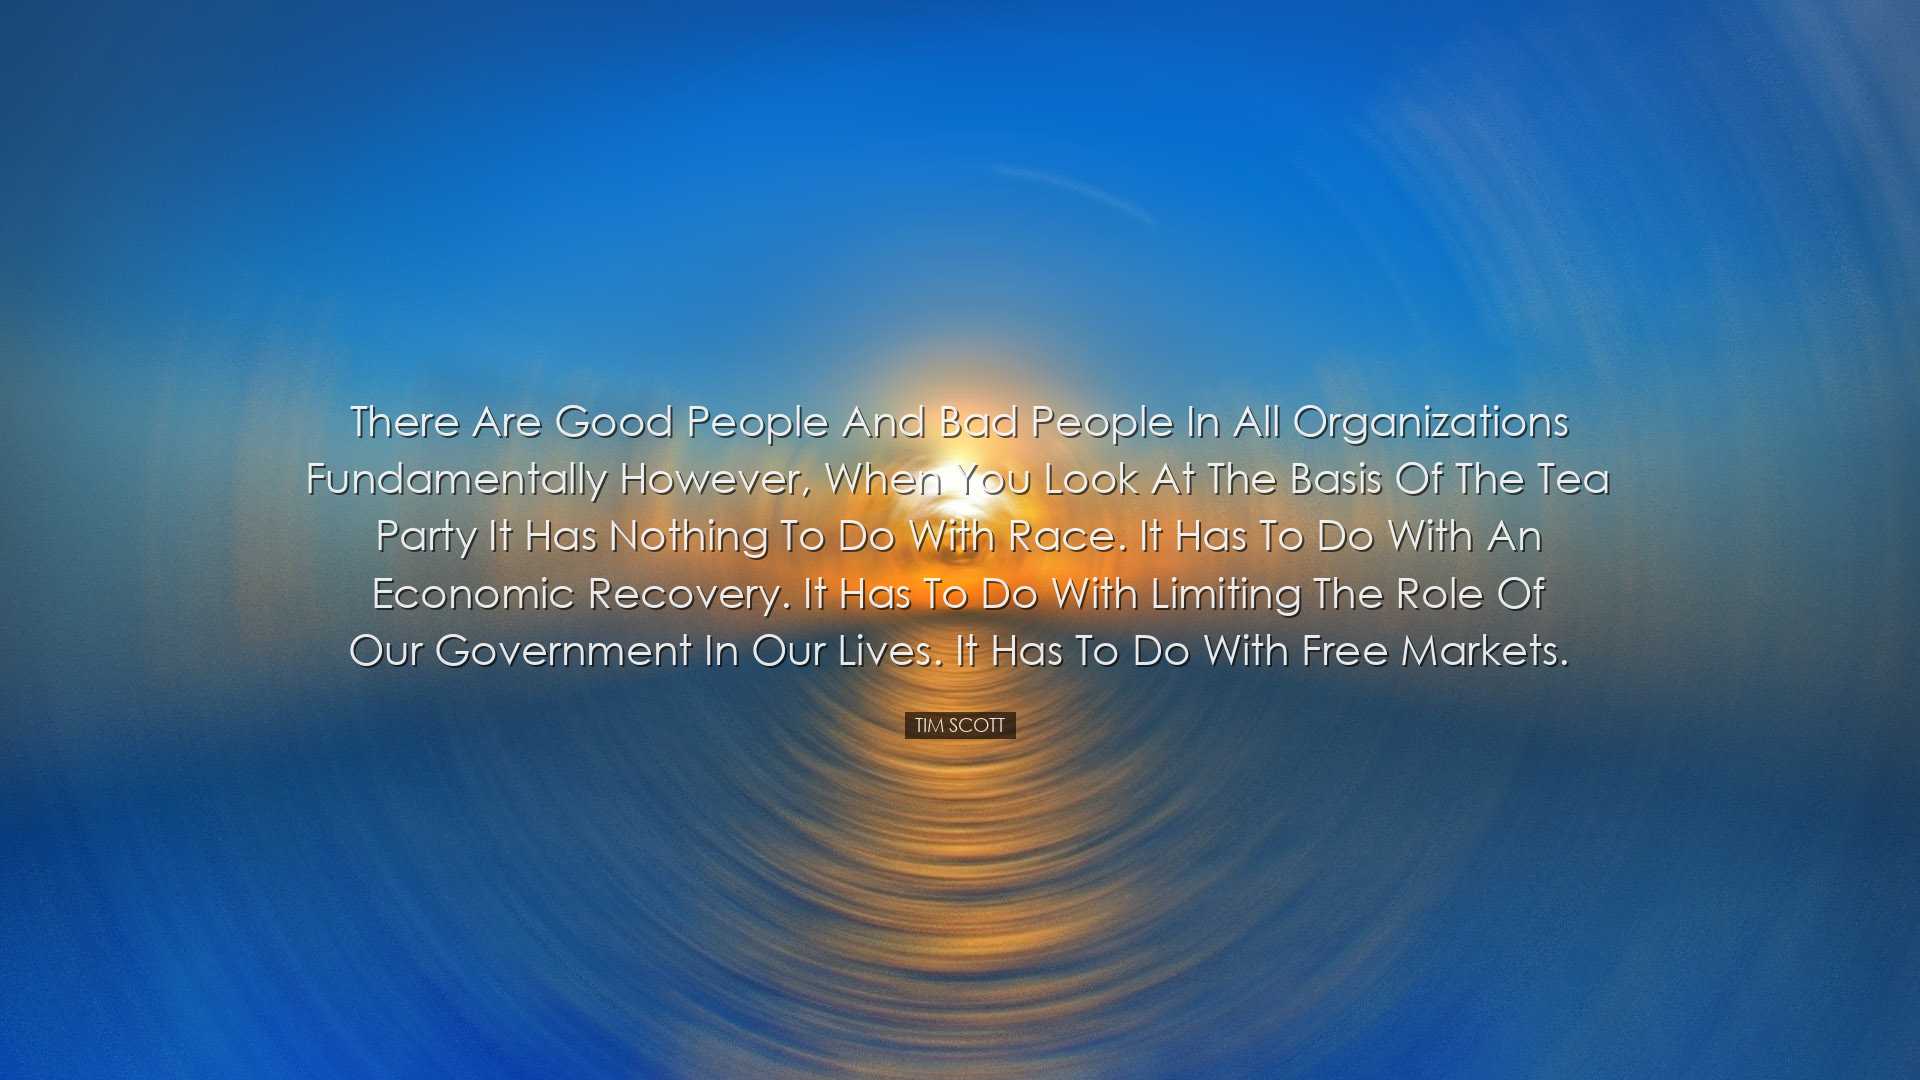 There are good people and bad people in all organizations fundamen